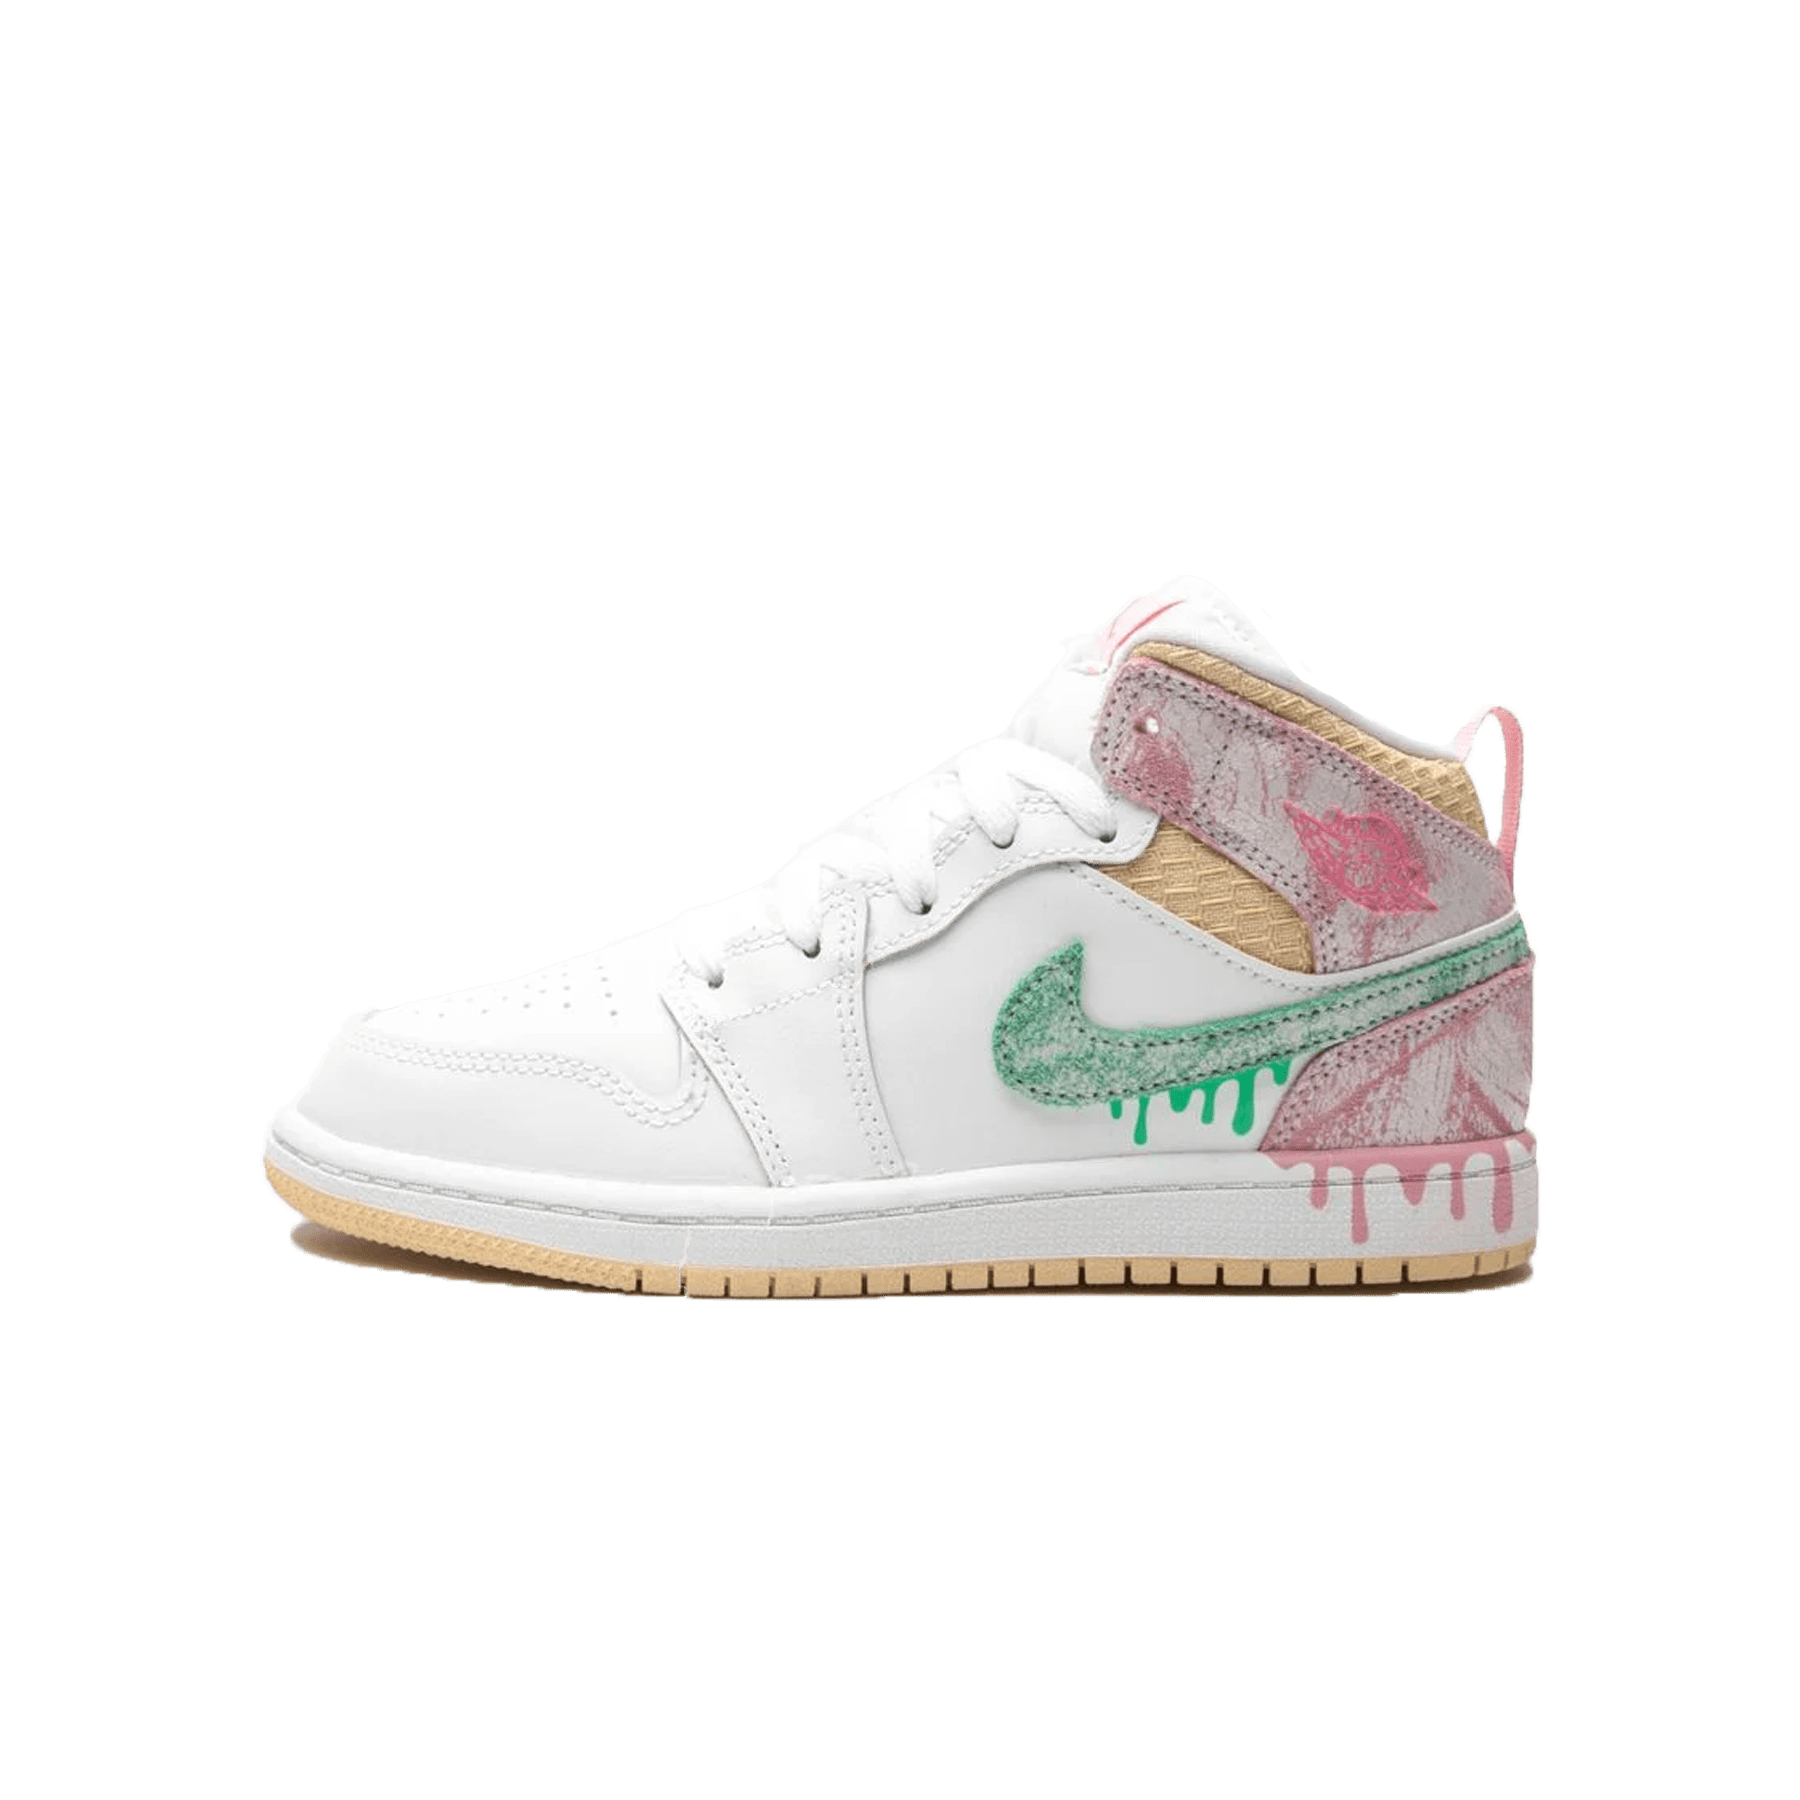 Painting Supreme x Louis Vuitton drip effect onto Nike Air Force 1 shoes 